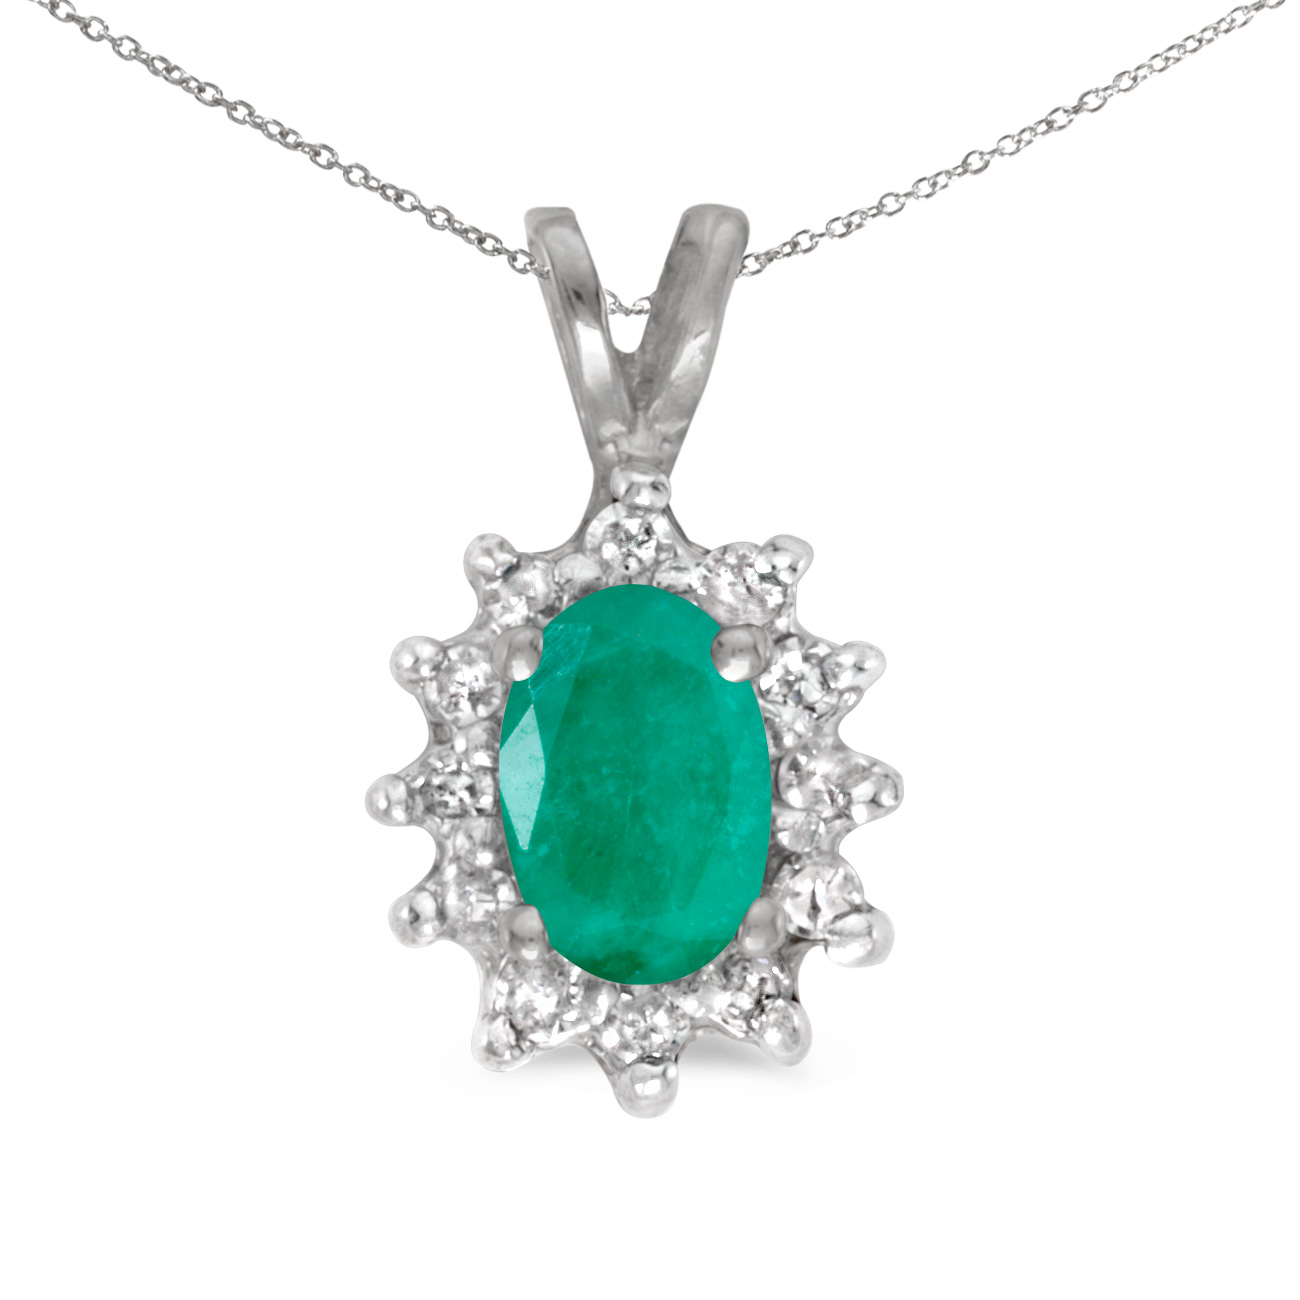 This 14k white gold oval emerald and diamond pendant features a 6x4 mm genuine natural emerald wi...